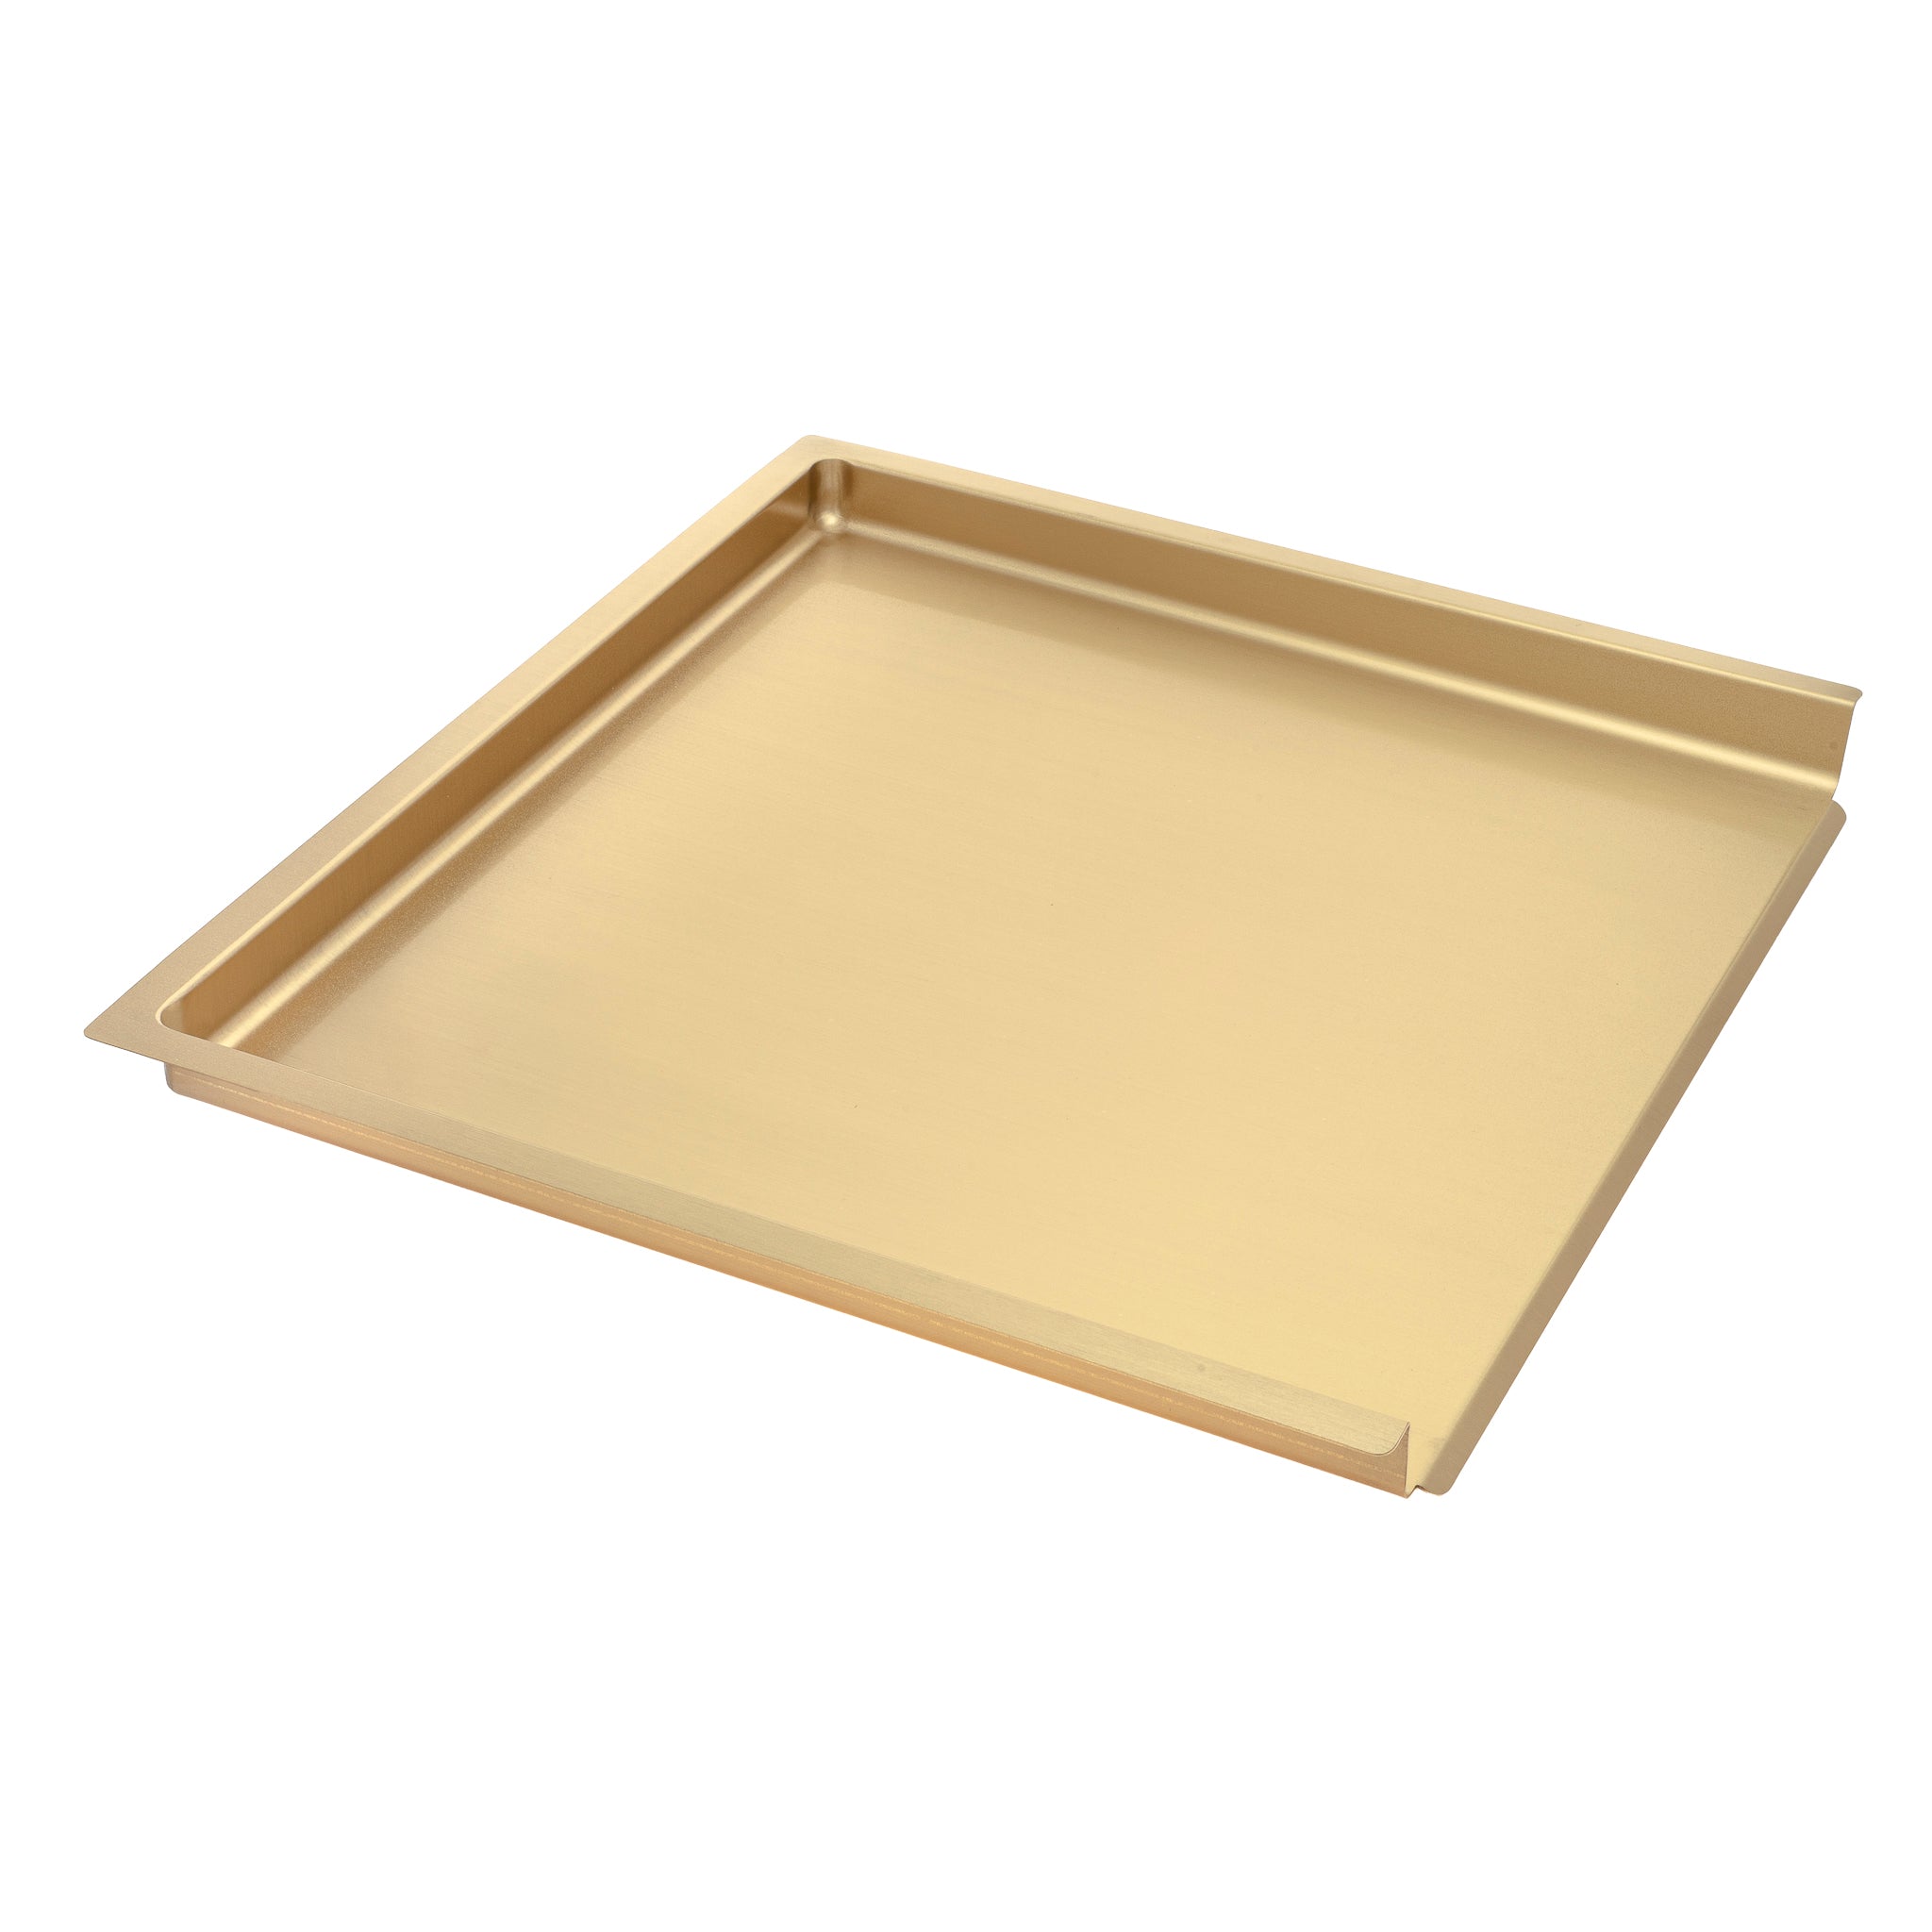 Retto Stainless Steel Drain Tray 395mm x 425mm, Brushed Brass Gold